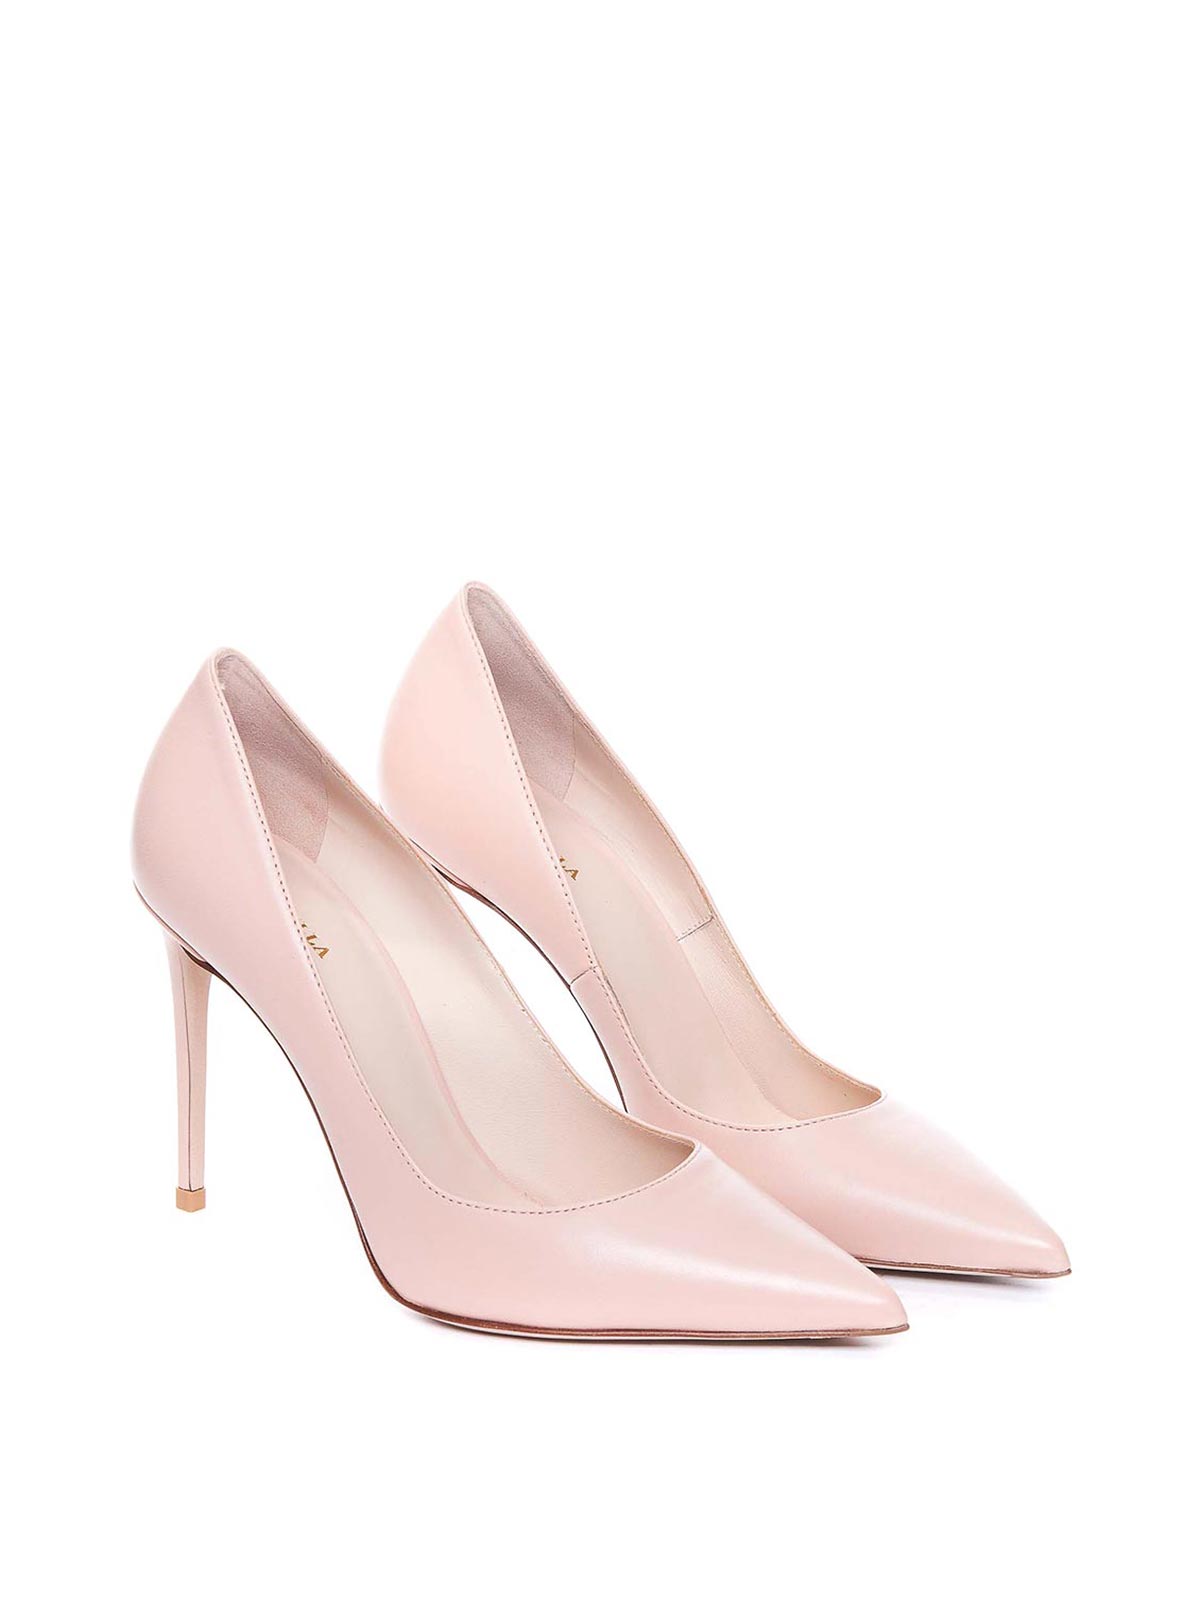 Shop Le Silla Leather Pumps In Nude & Neutrals